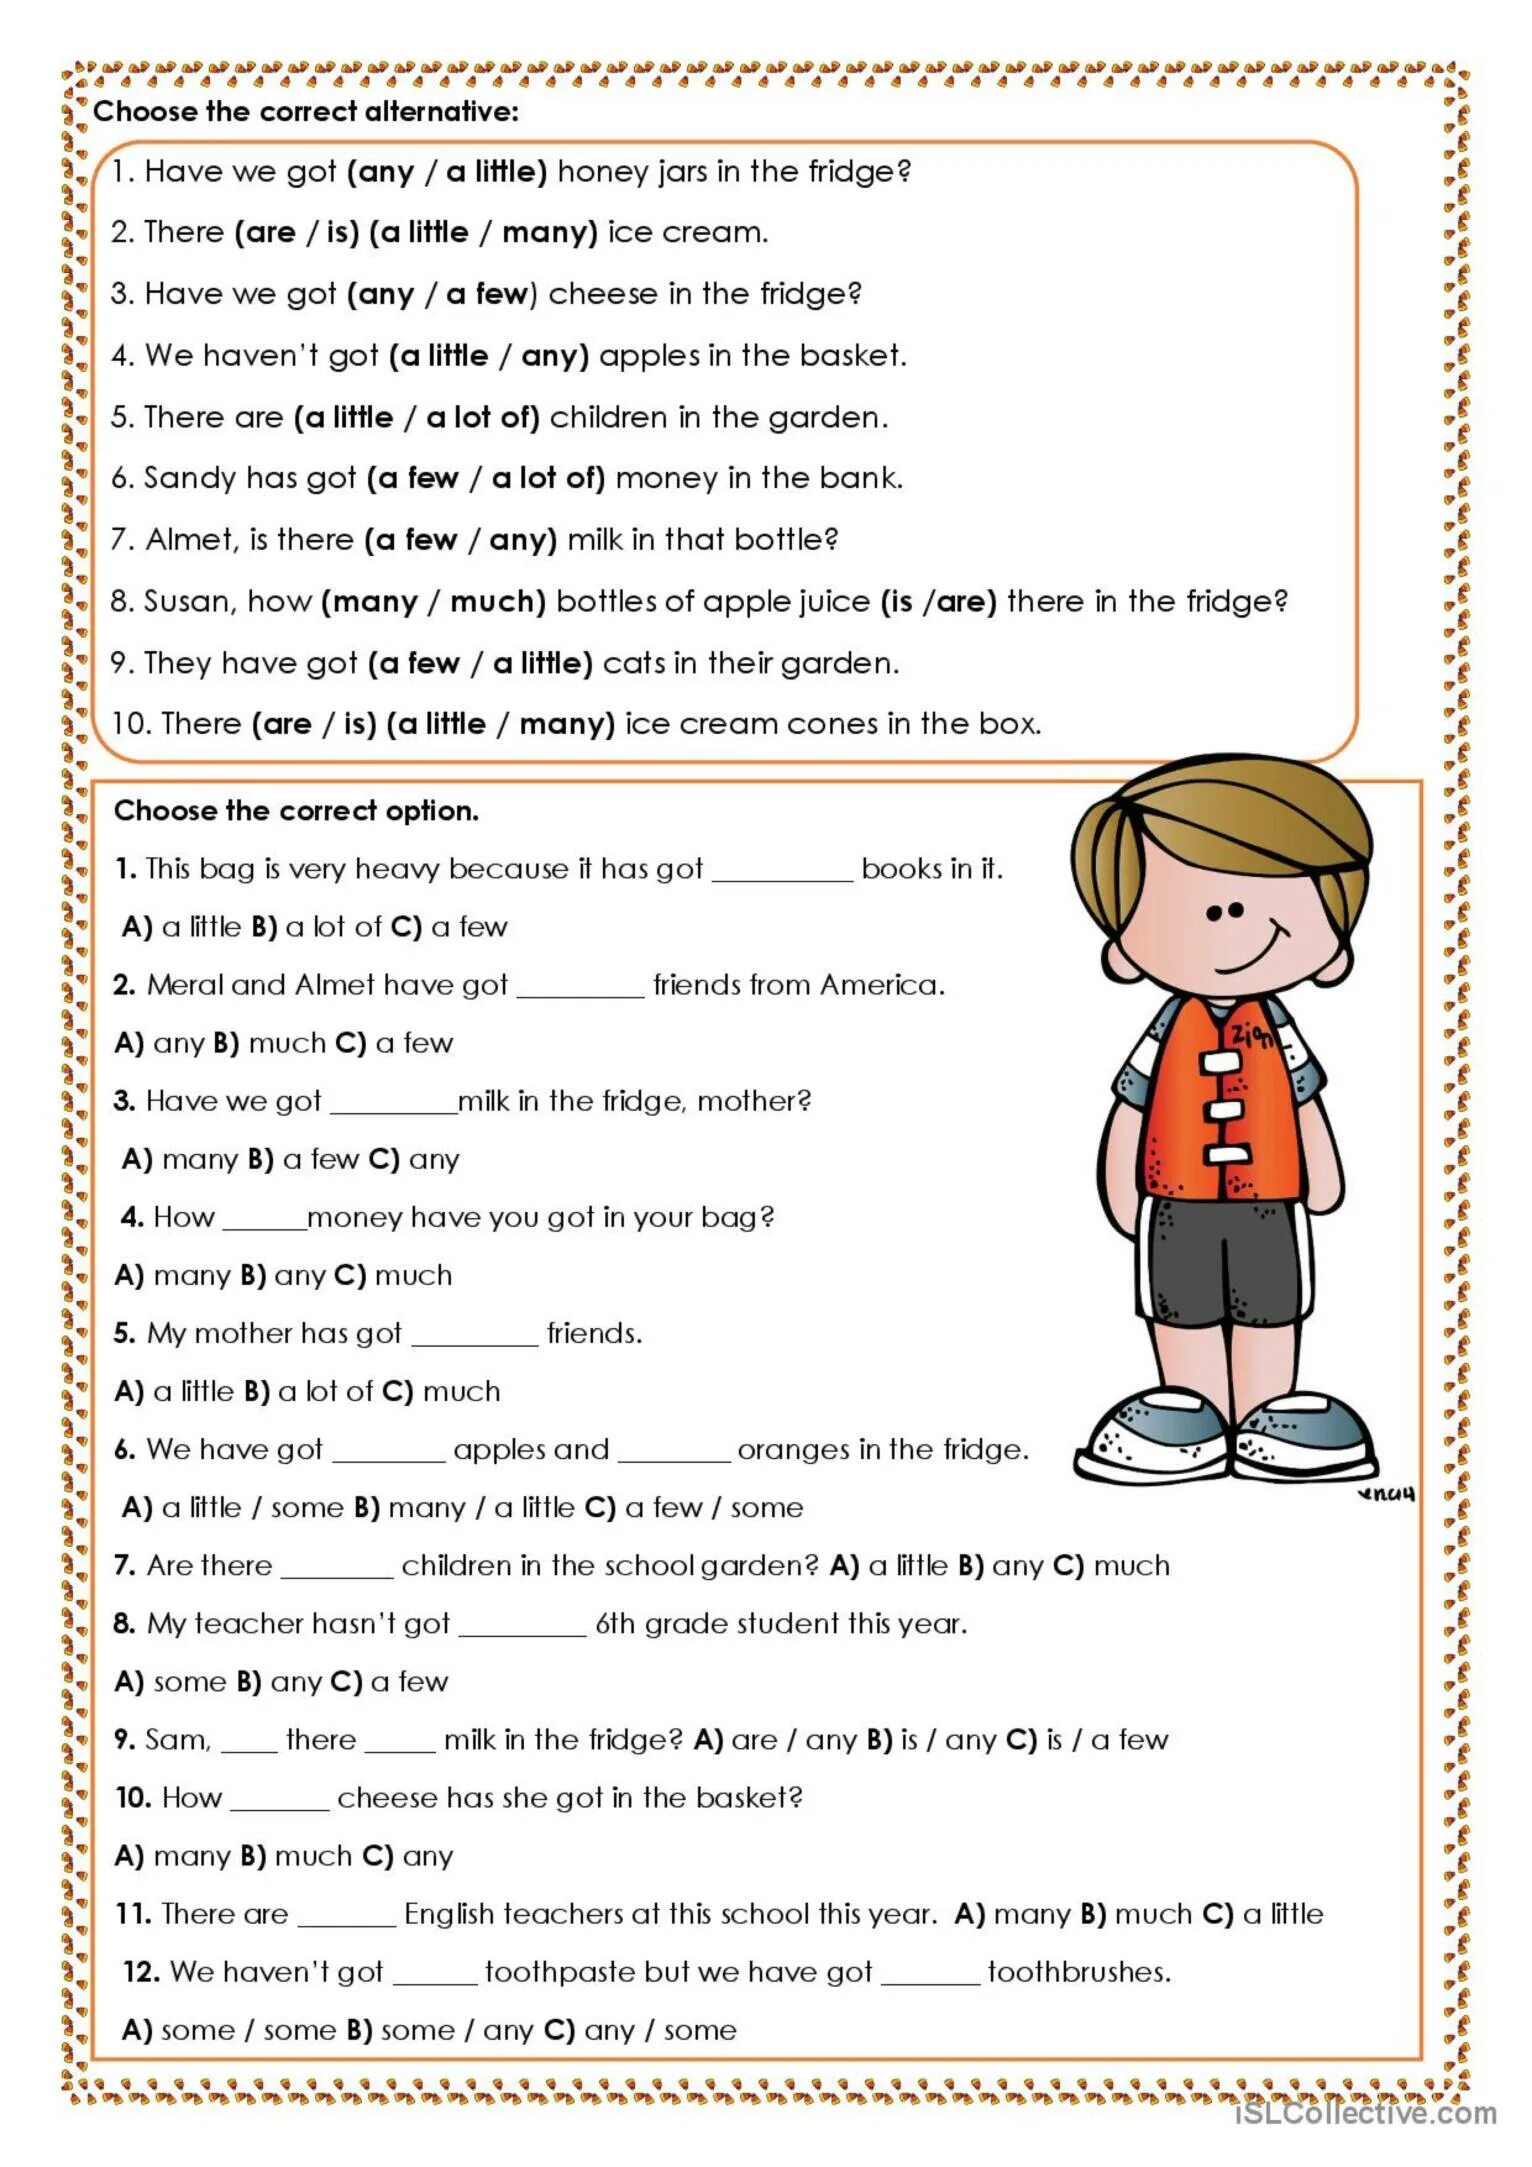 Quantifiers exercises Worksheets. Quantifiers в английском языке Worksheets. Quantifiers упражнения. Quantifiers в английском языке упражнения. Much many test english